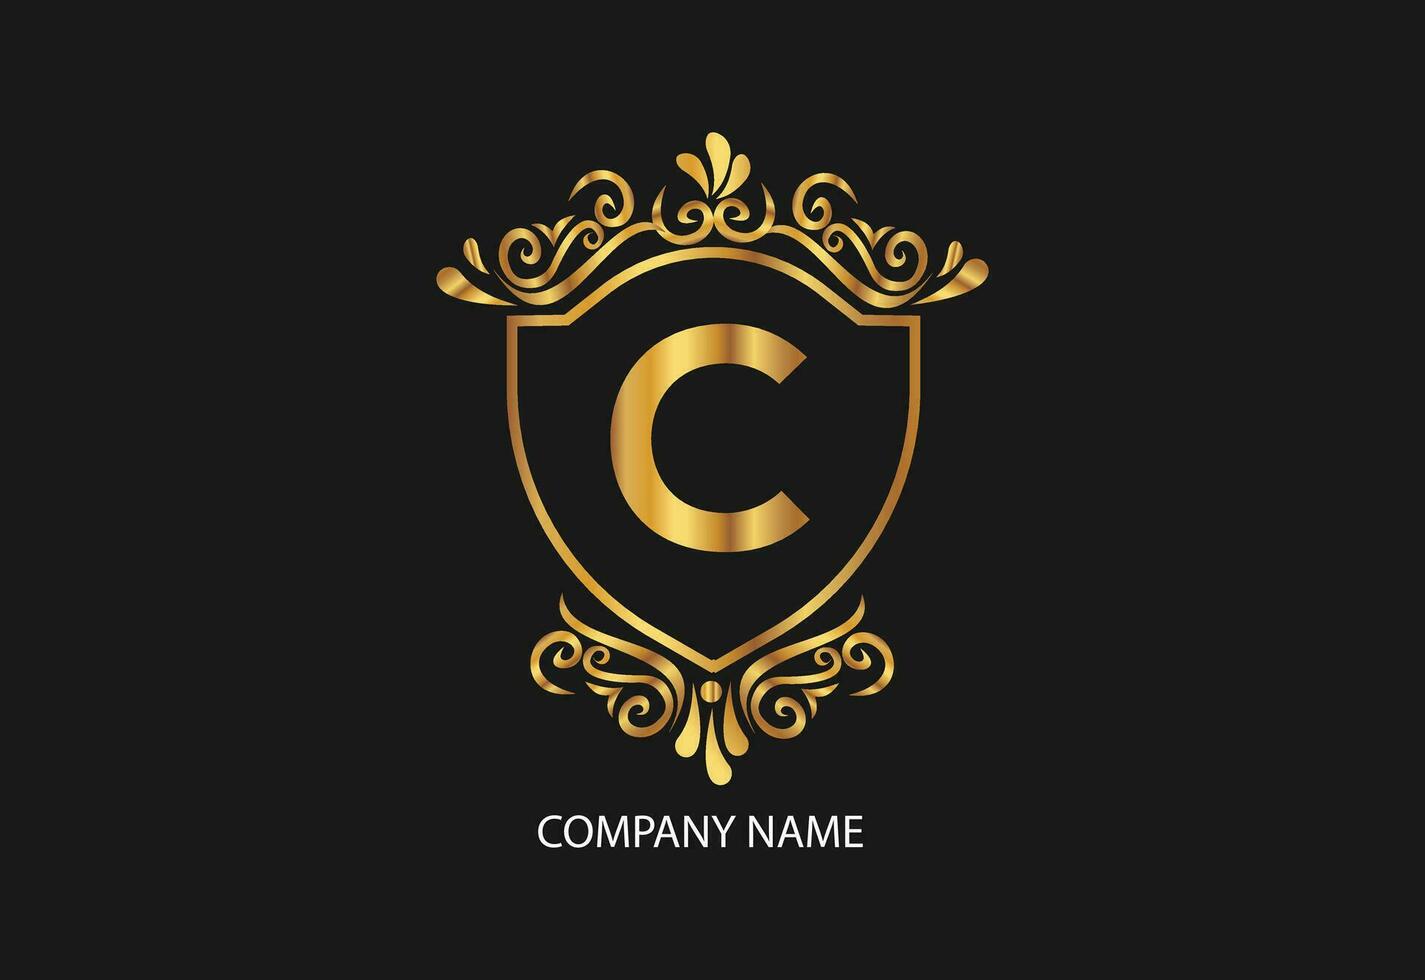 latter C natural and organic logo modern design. Natural logo for branding, corporate identity and business card vector